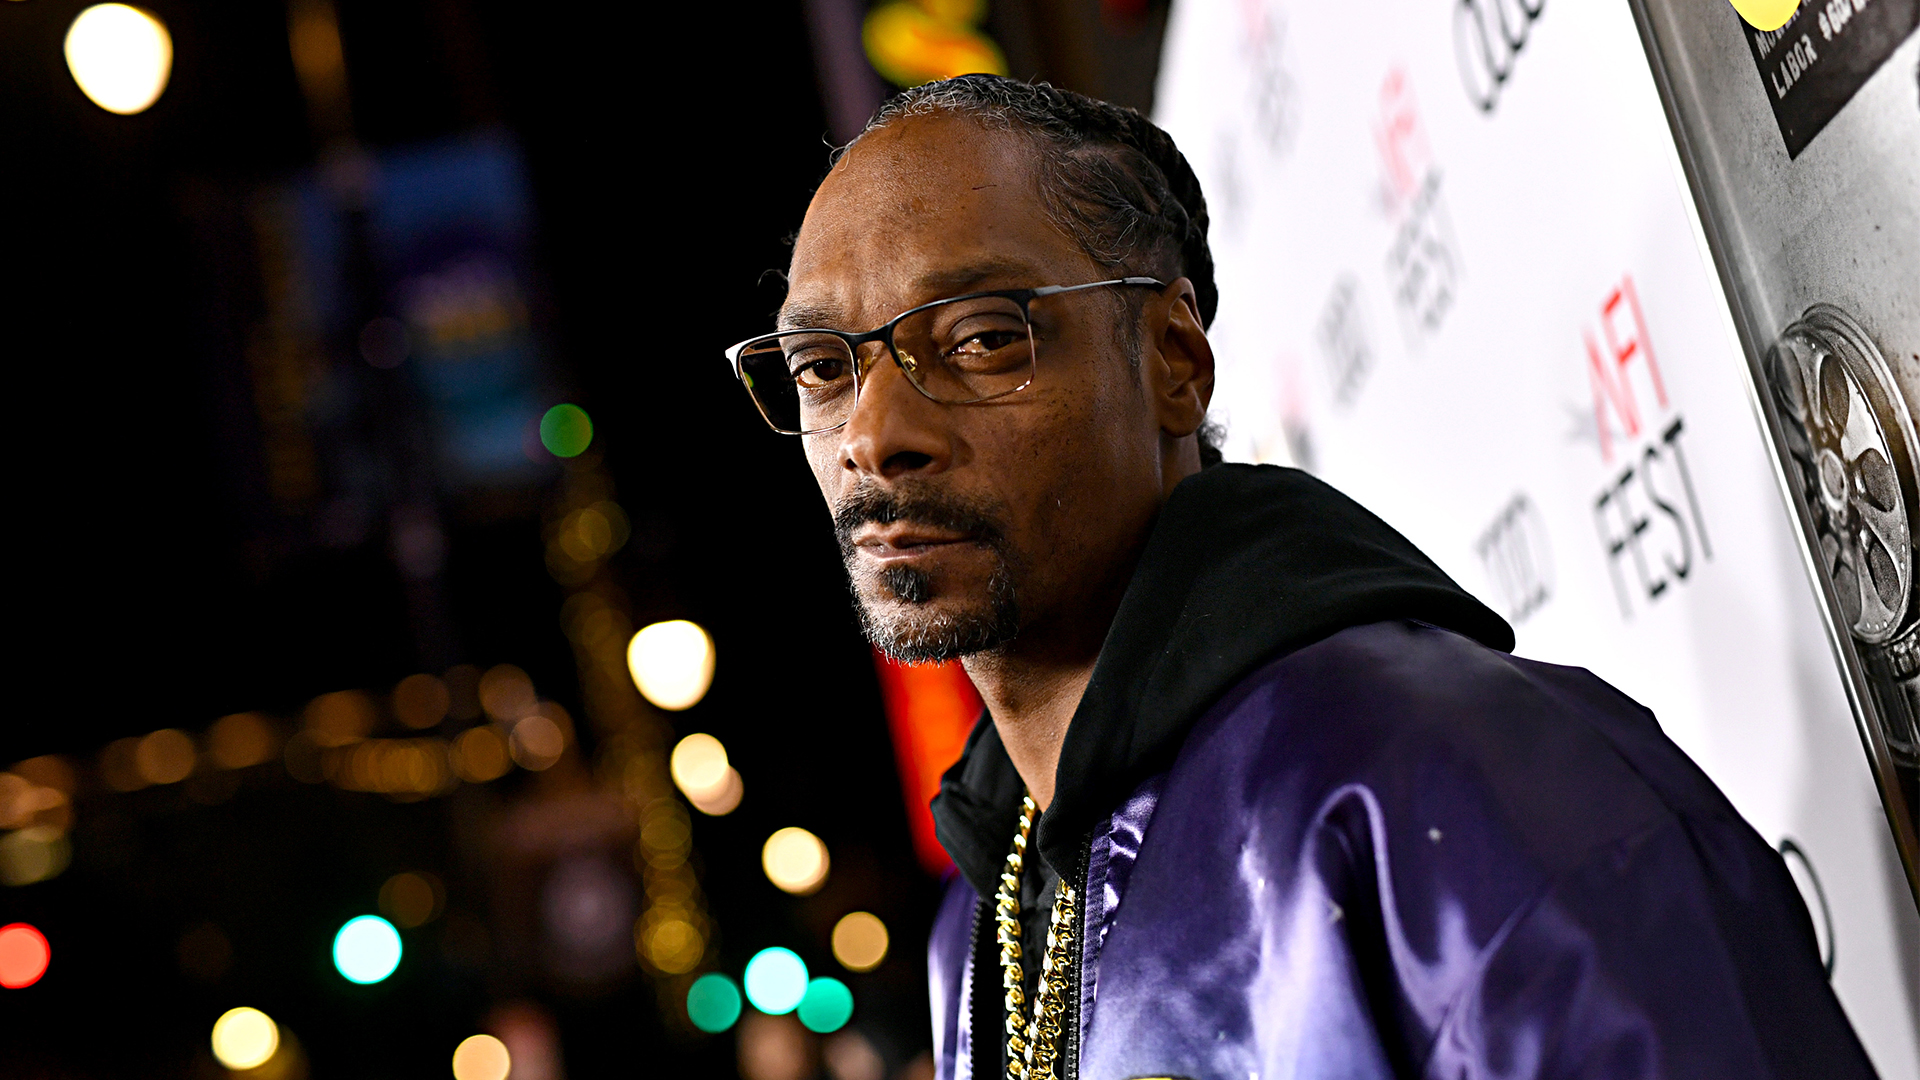 Snoop Dogg's Investment In Cannabis Startup Dutchie Doubles Its Value To $3.75B